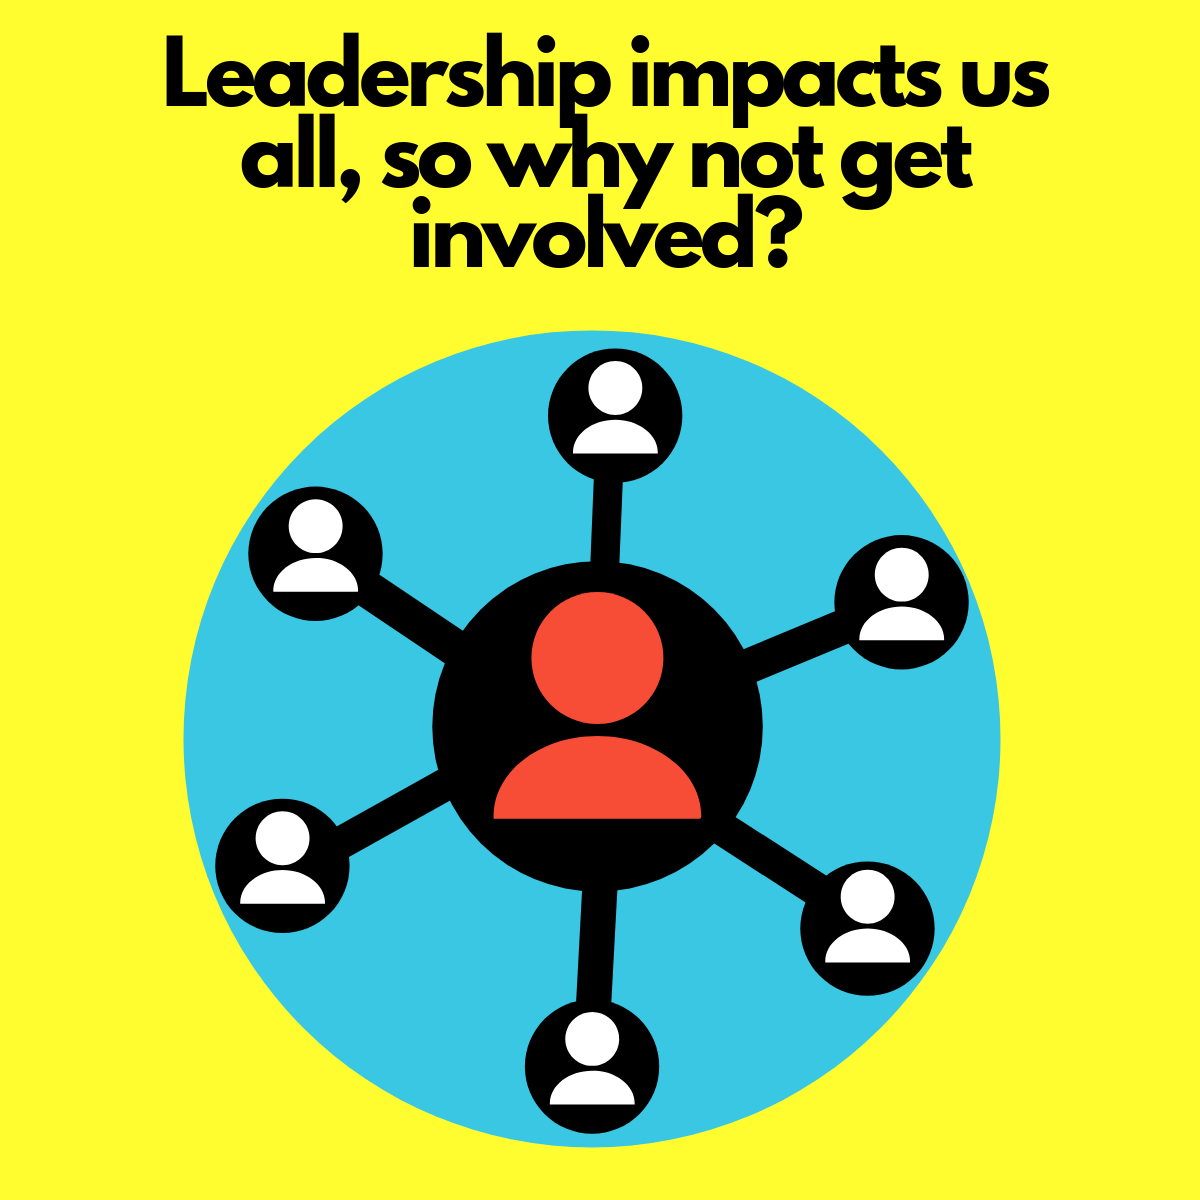 Leadership impacts us all, so why not get involved?